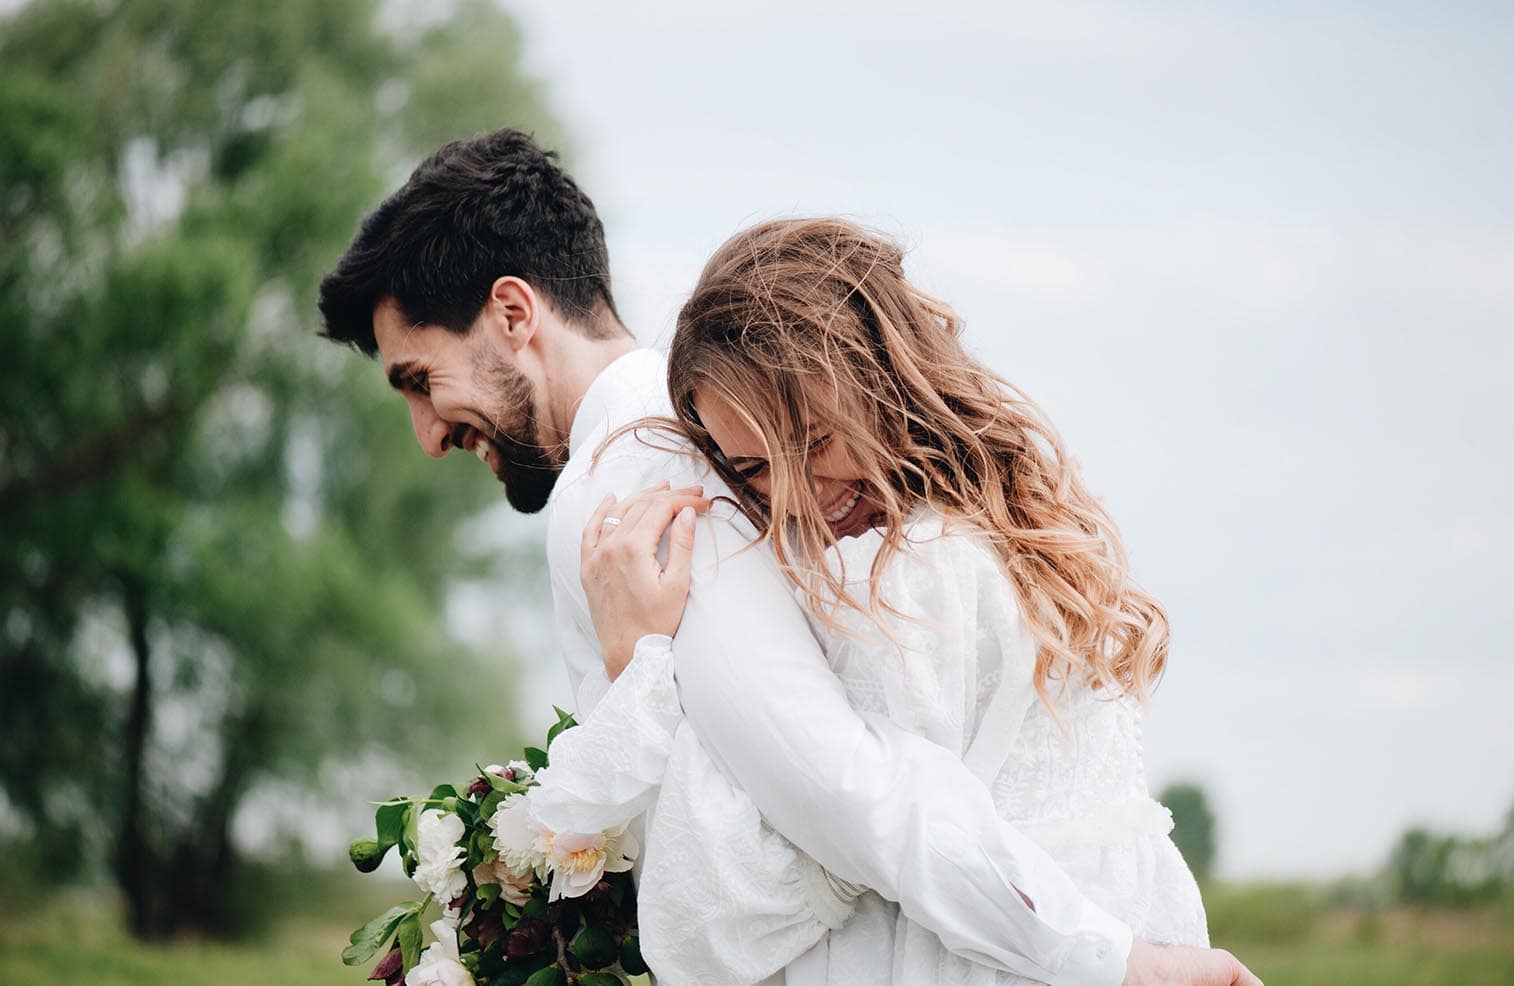 A happy marriage is one we all aspire to have, but how does it happen? Firstly, you need to stop believing these things about marriage that are total lies.